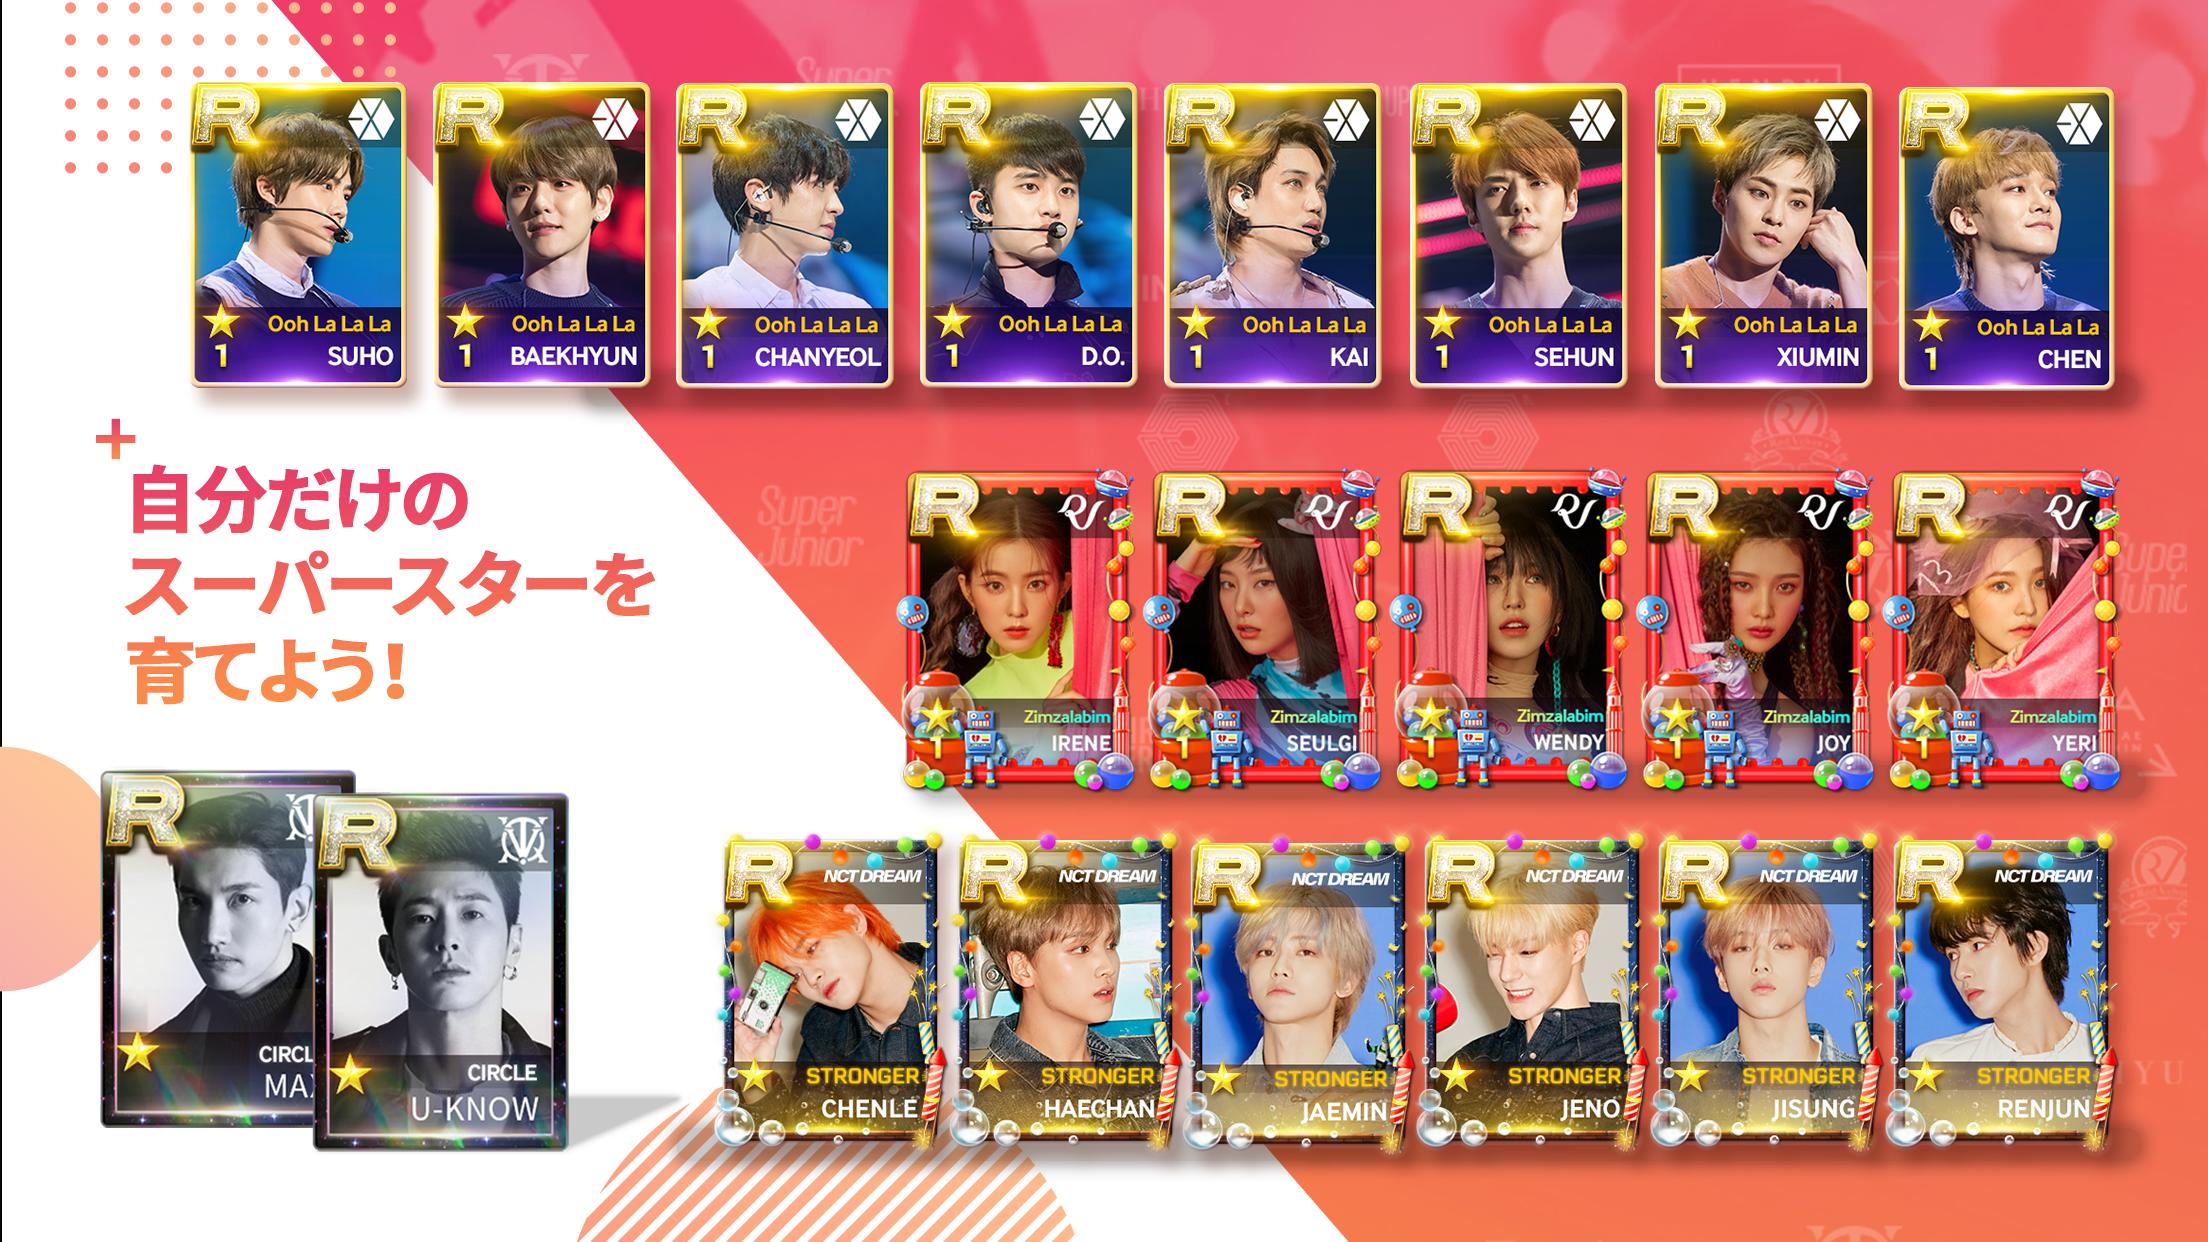 SUPERSTAR SMTOWN for Android - APK Download